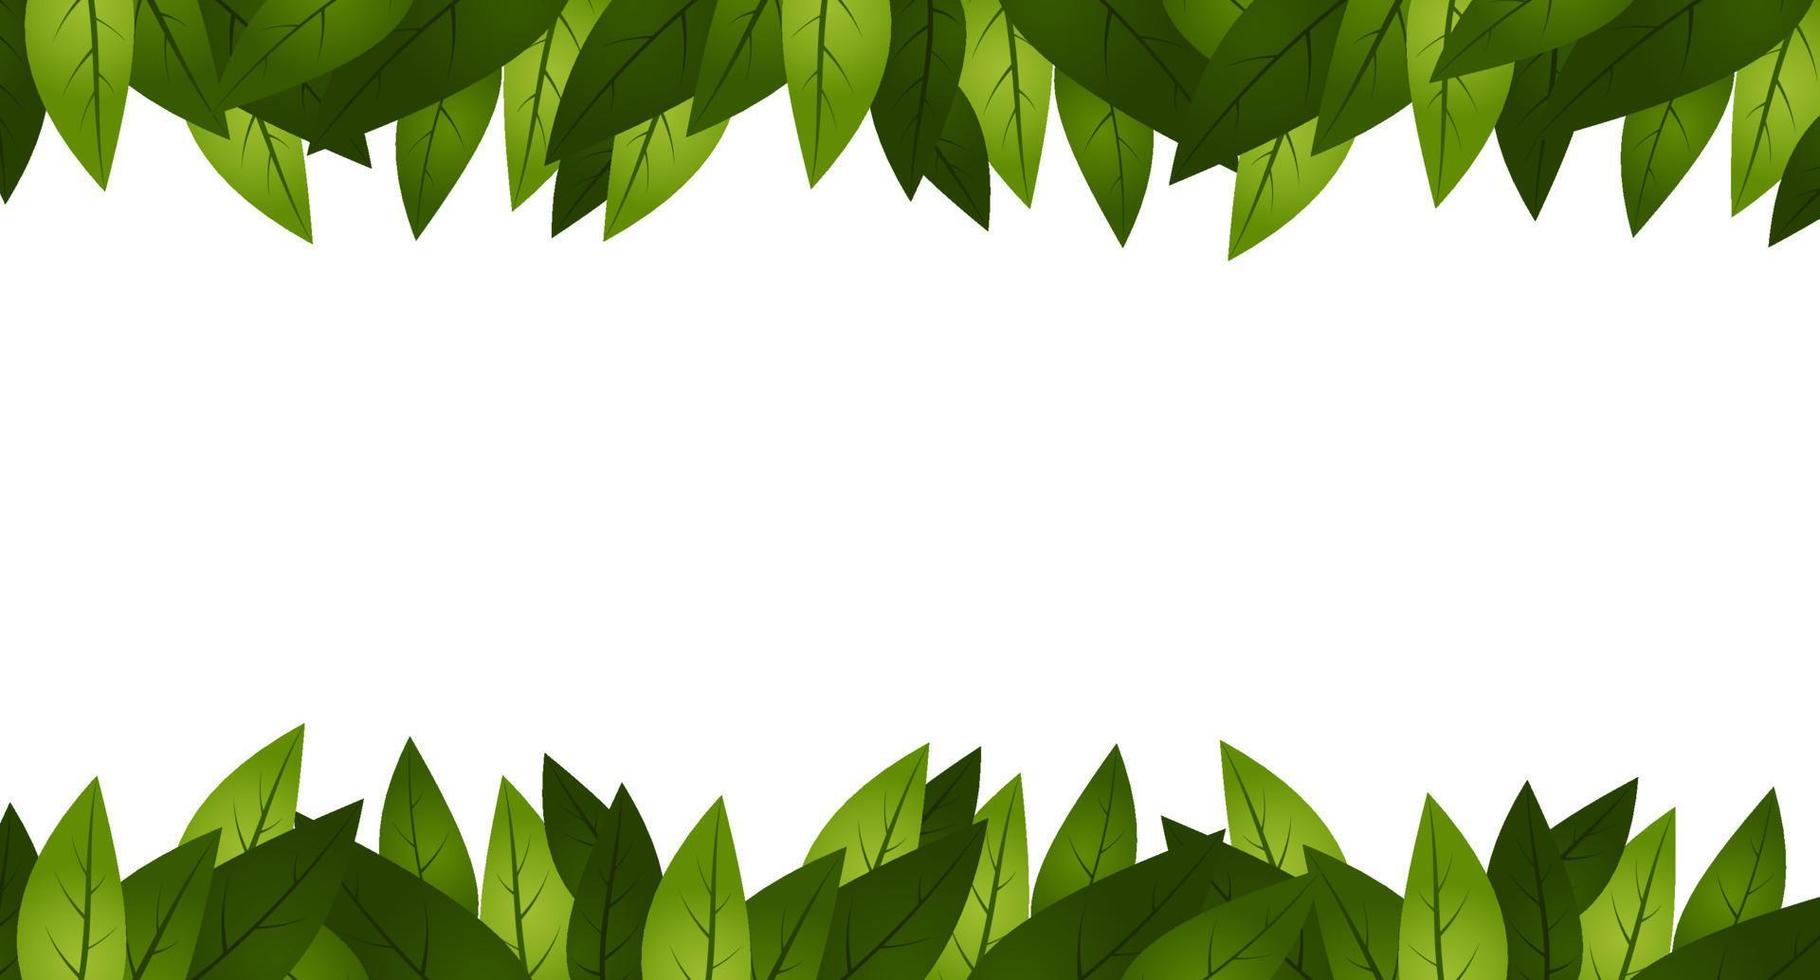 Tropical leaves frame. Corners with green leaves. Frame with green leaves. Green leaves nature frame layout. Fresh green leaves. Vector illustration